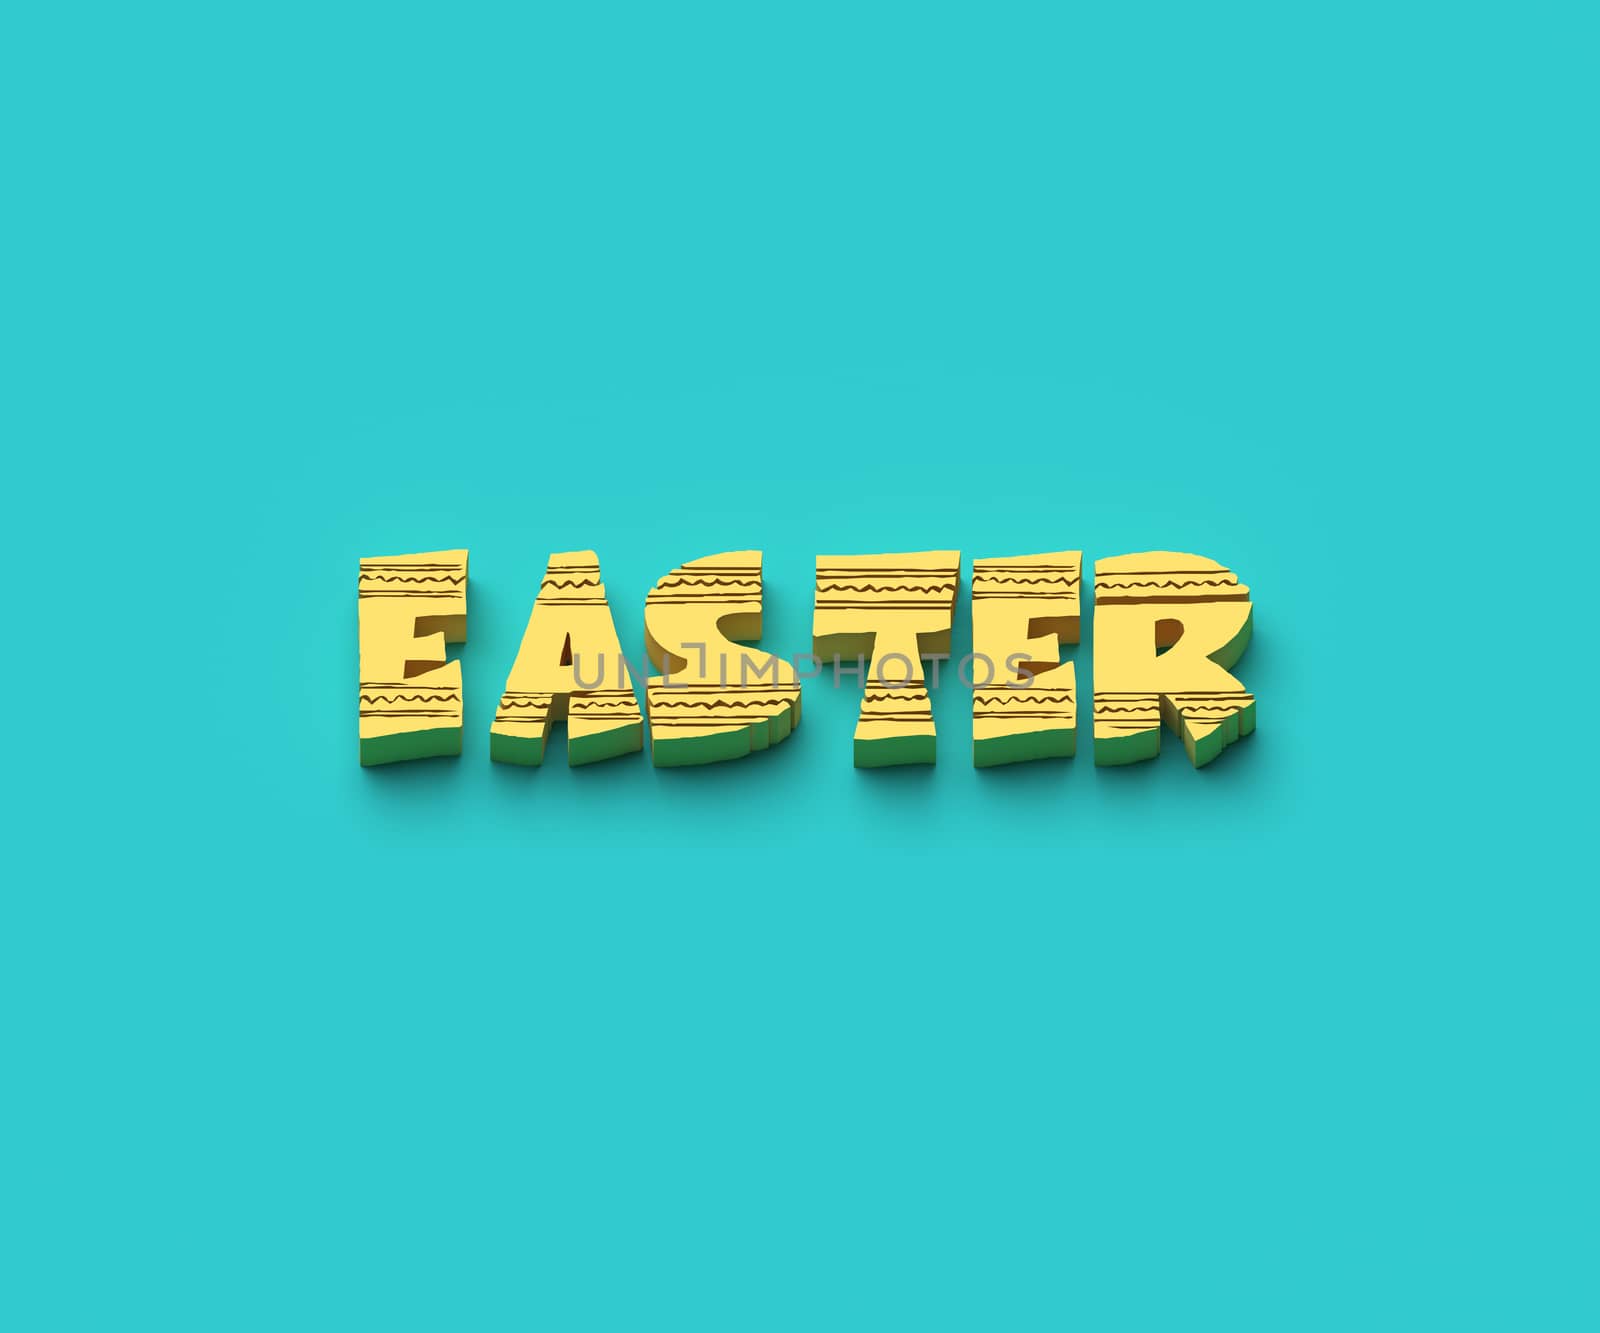 3D WORDS OF 'EASTER' ON PLAIN BACKGROUND